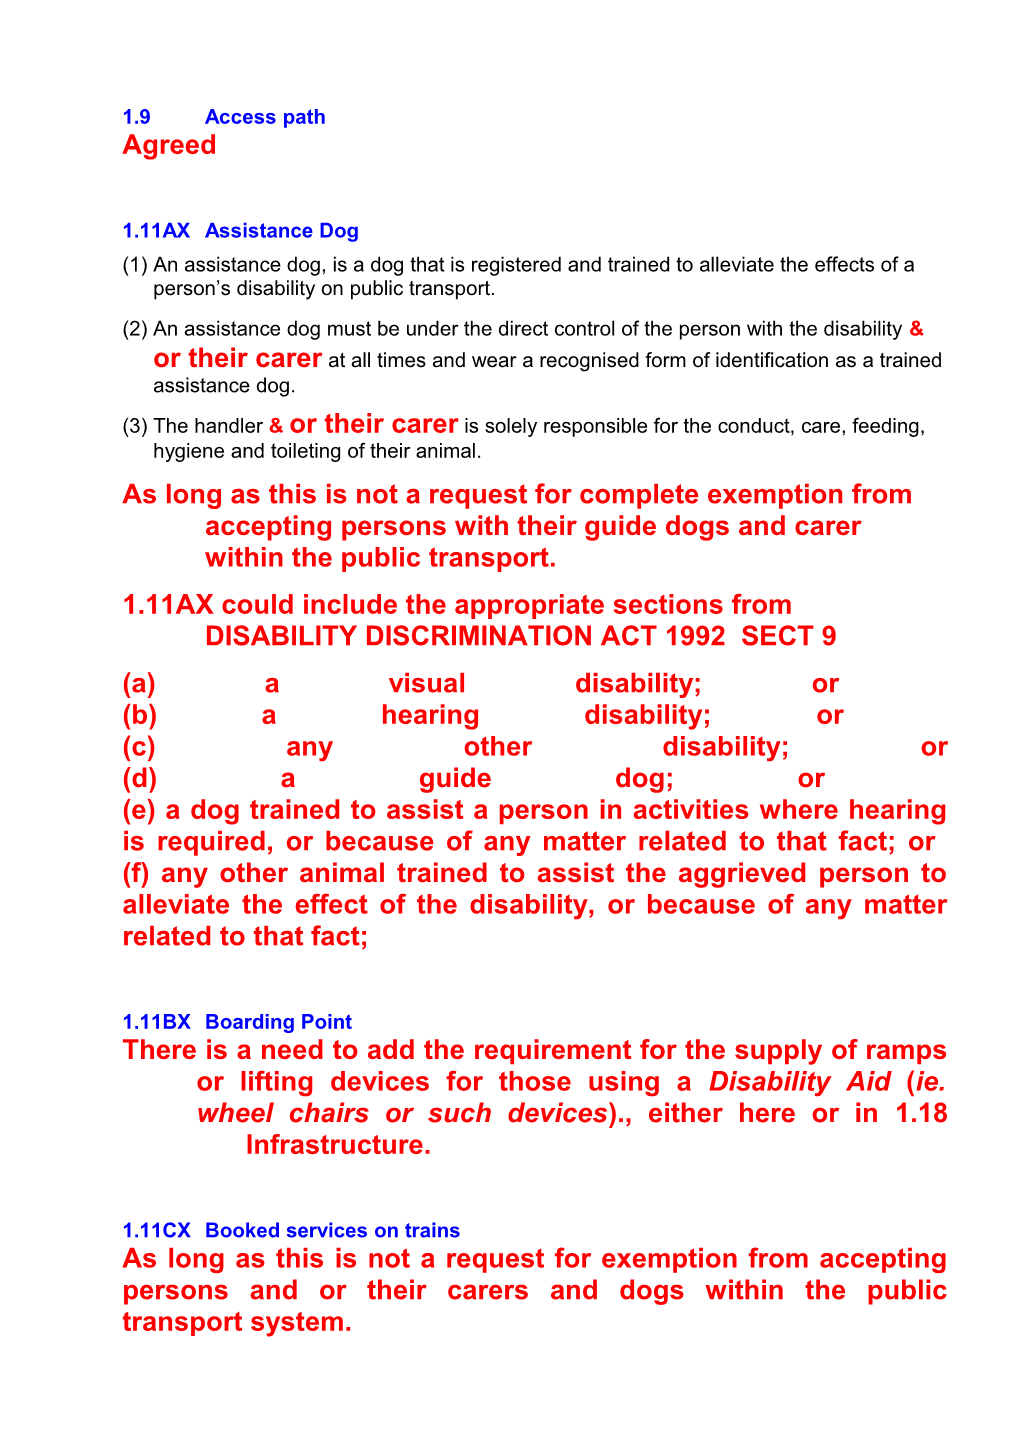 1.11AX Could Include the Appropriate Sections from DISABILITY DISCRIMINATION ACT 1992 SECT 9